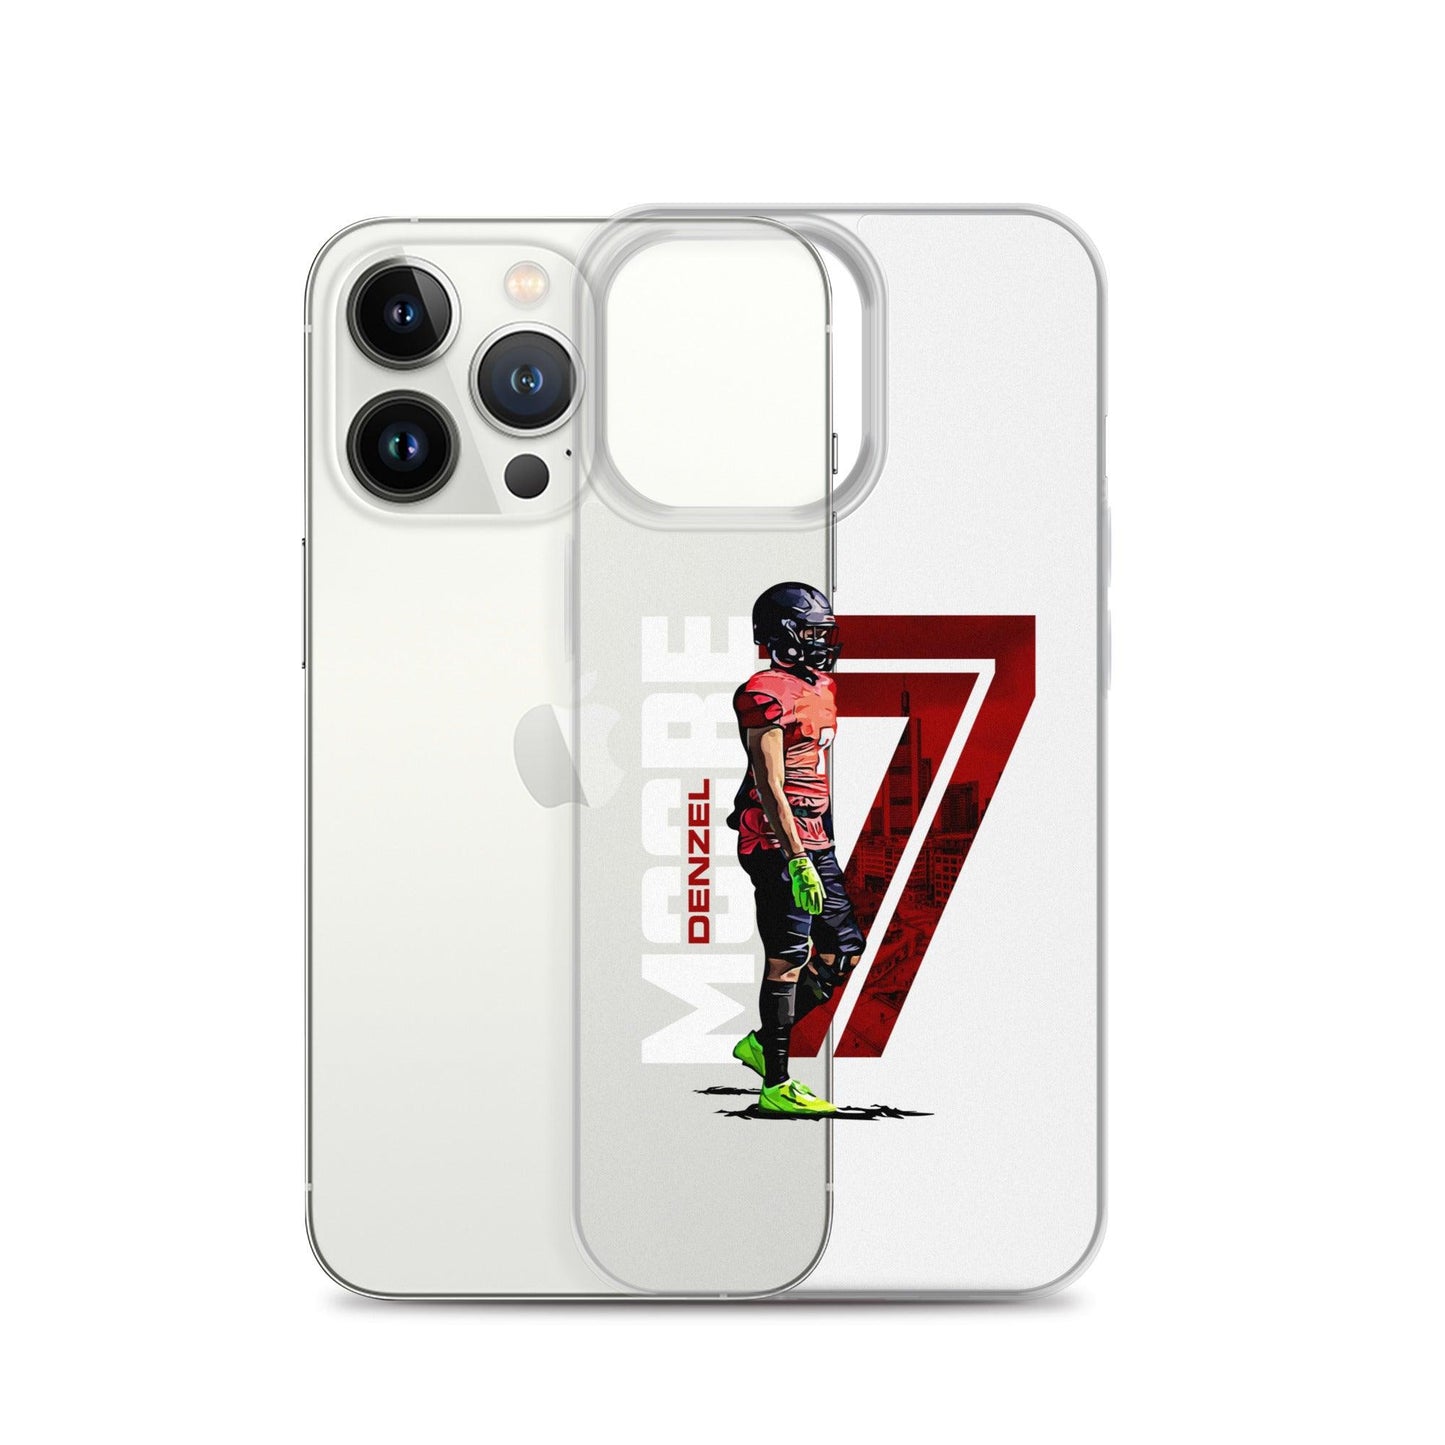 Denzel Moore "Gameday" iPhone Case - Fan Arch